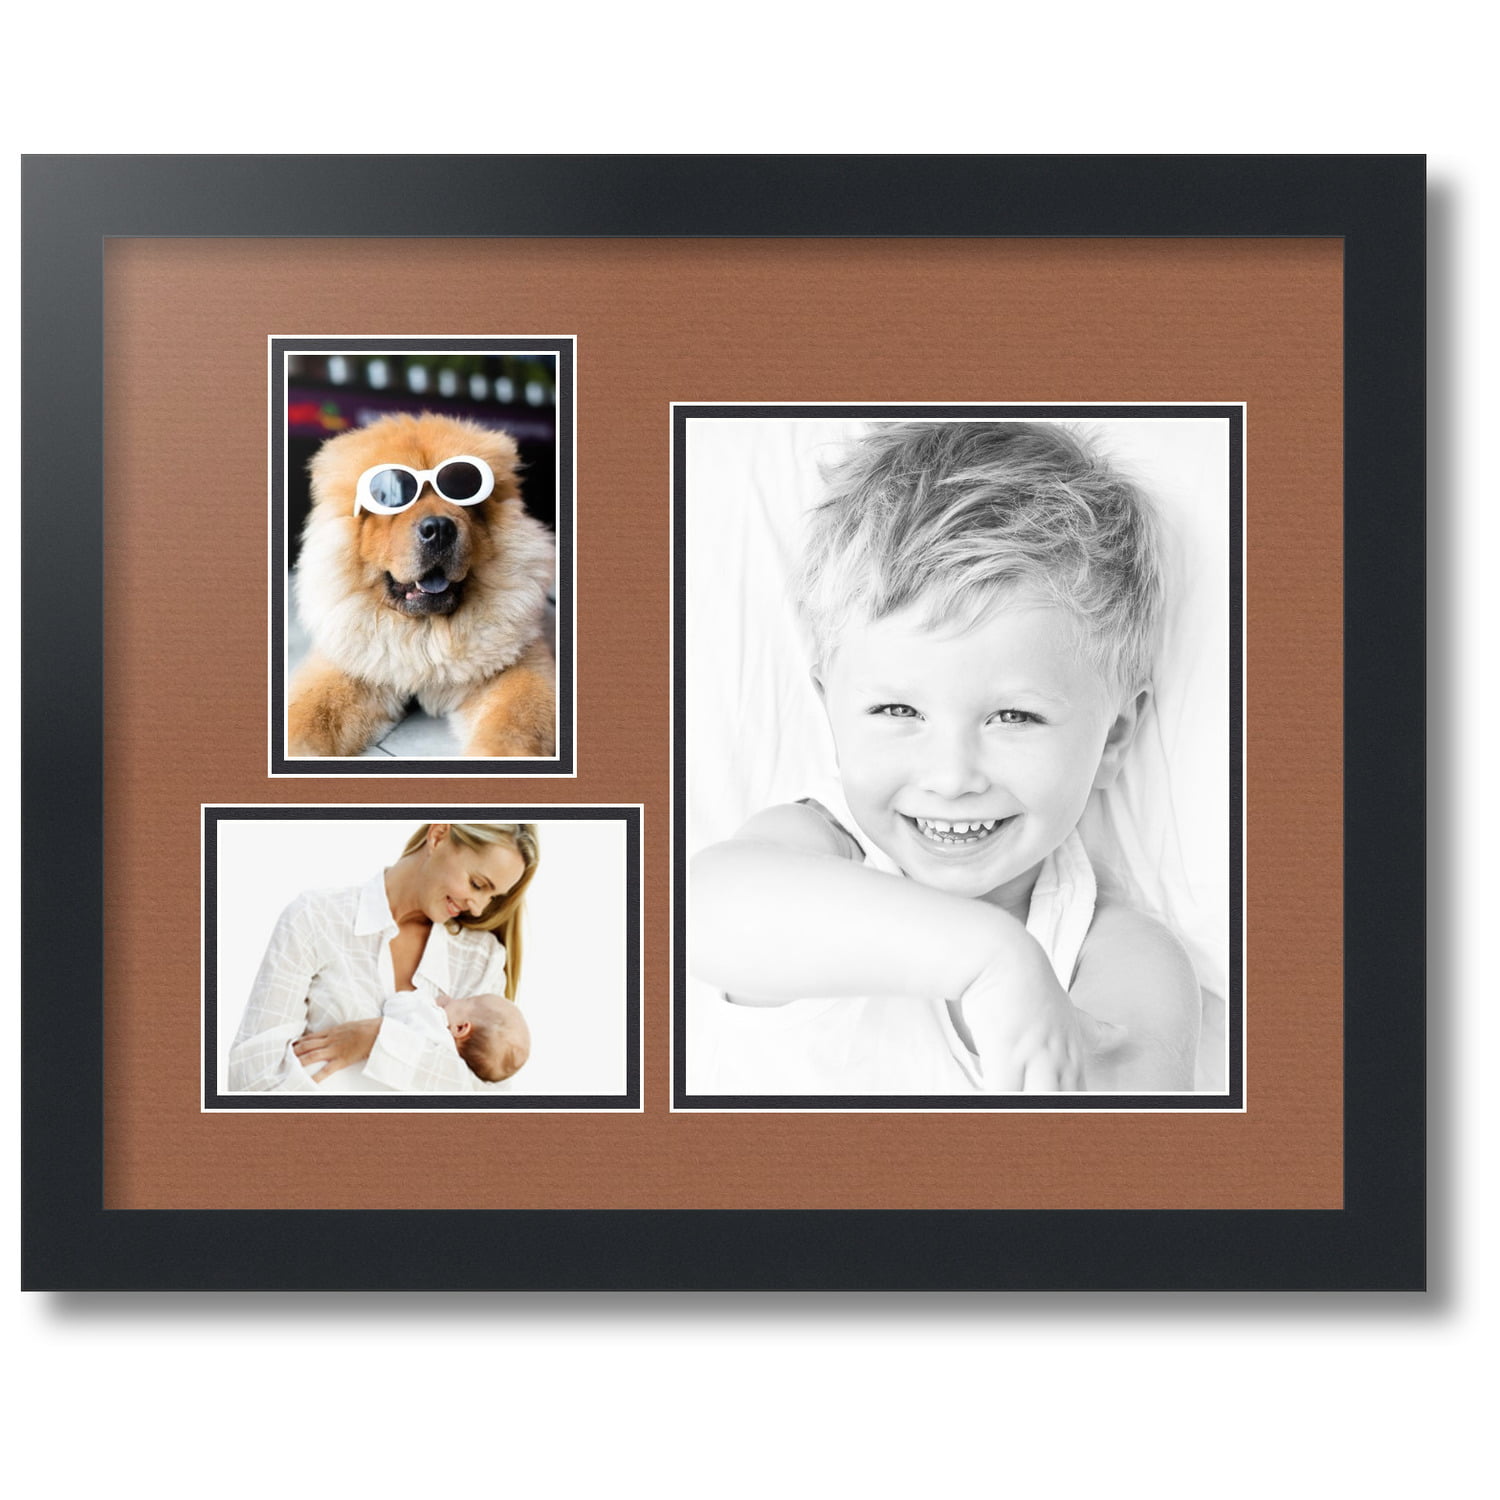 ArtToFrames Collage Photo Picture Frame with 4 - 8x10 Openings, Framed in  Black with Octoberfest and Black Mats (CDM-3926-1)